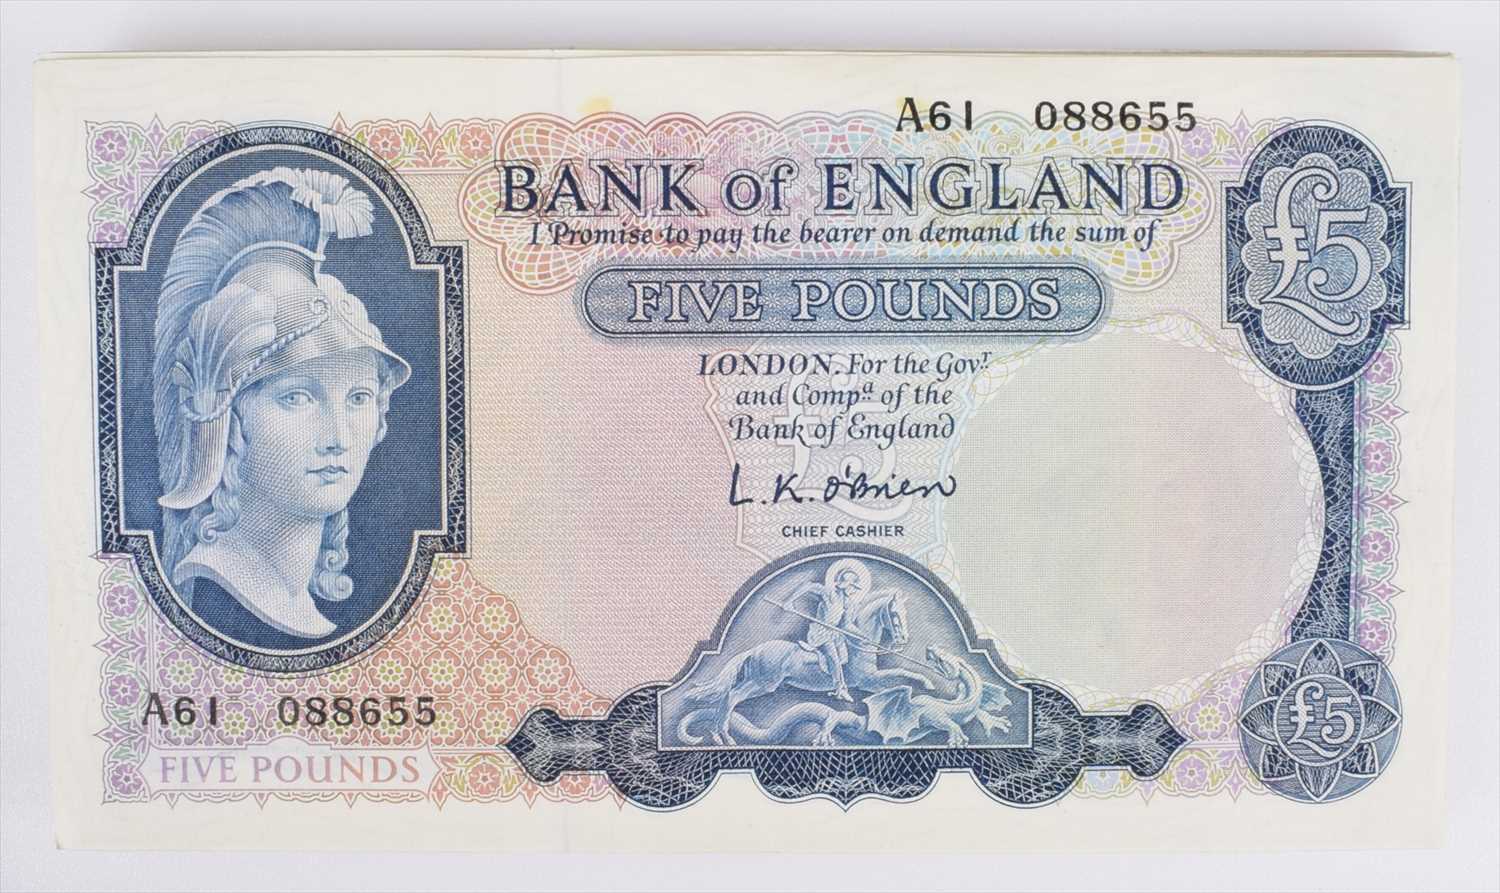 Forty-four Series "B" Helmeted Britannia Issue (February 1957), Five Pounds banknotes (44).